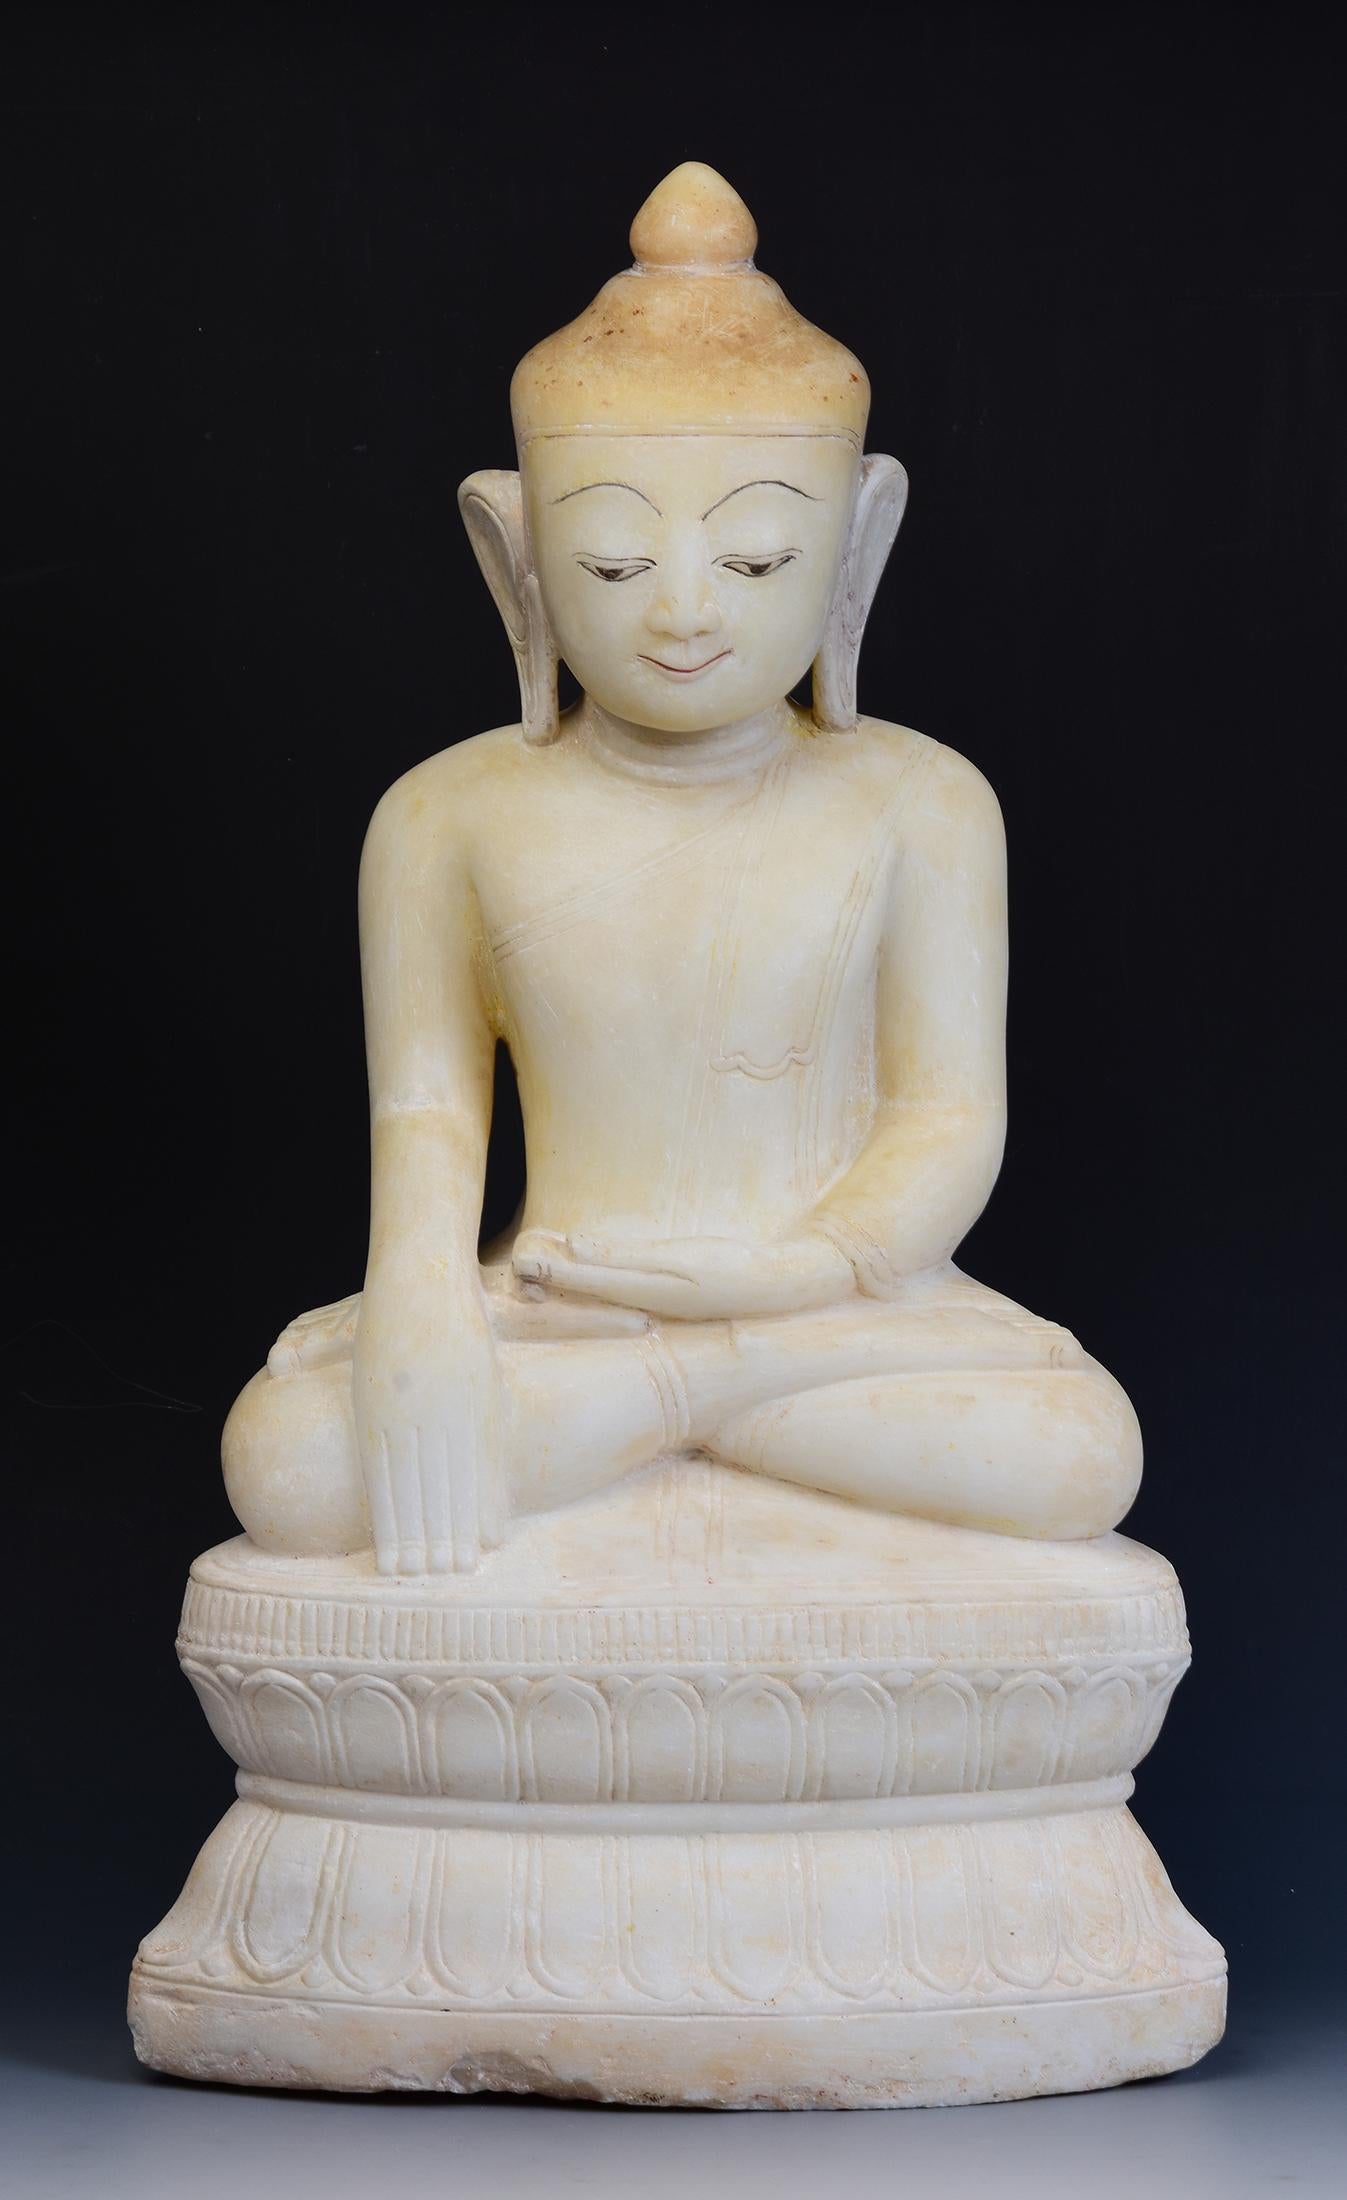 Burmese alabaster Buddha sitting in Mara Vijaya (calling the earth to witness) posture on a base.

Age: Burma, Shan Period, 17th - 18th Century
Size: Height 56 C.M. / Width 32 C.M.
Condition: Nice condition overall (some expected degradation due